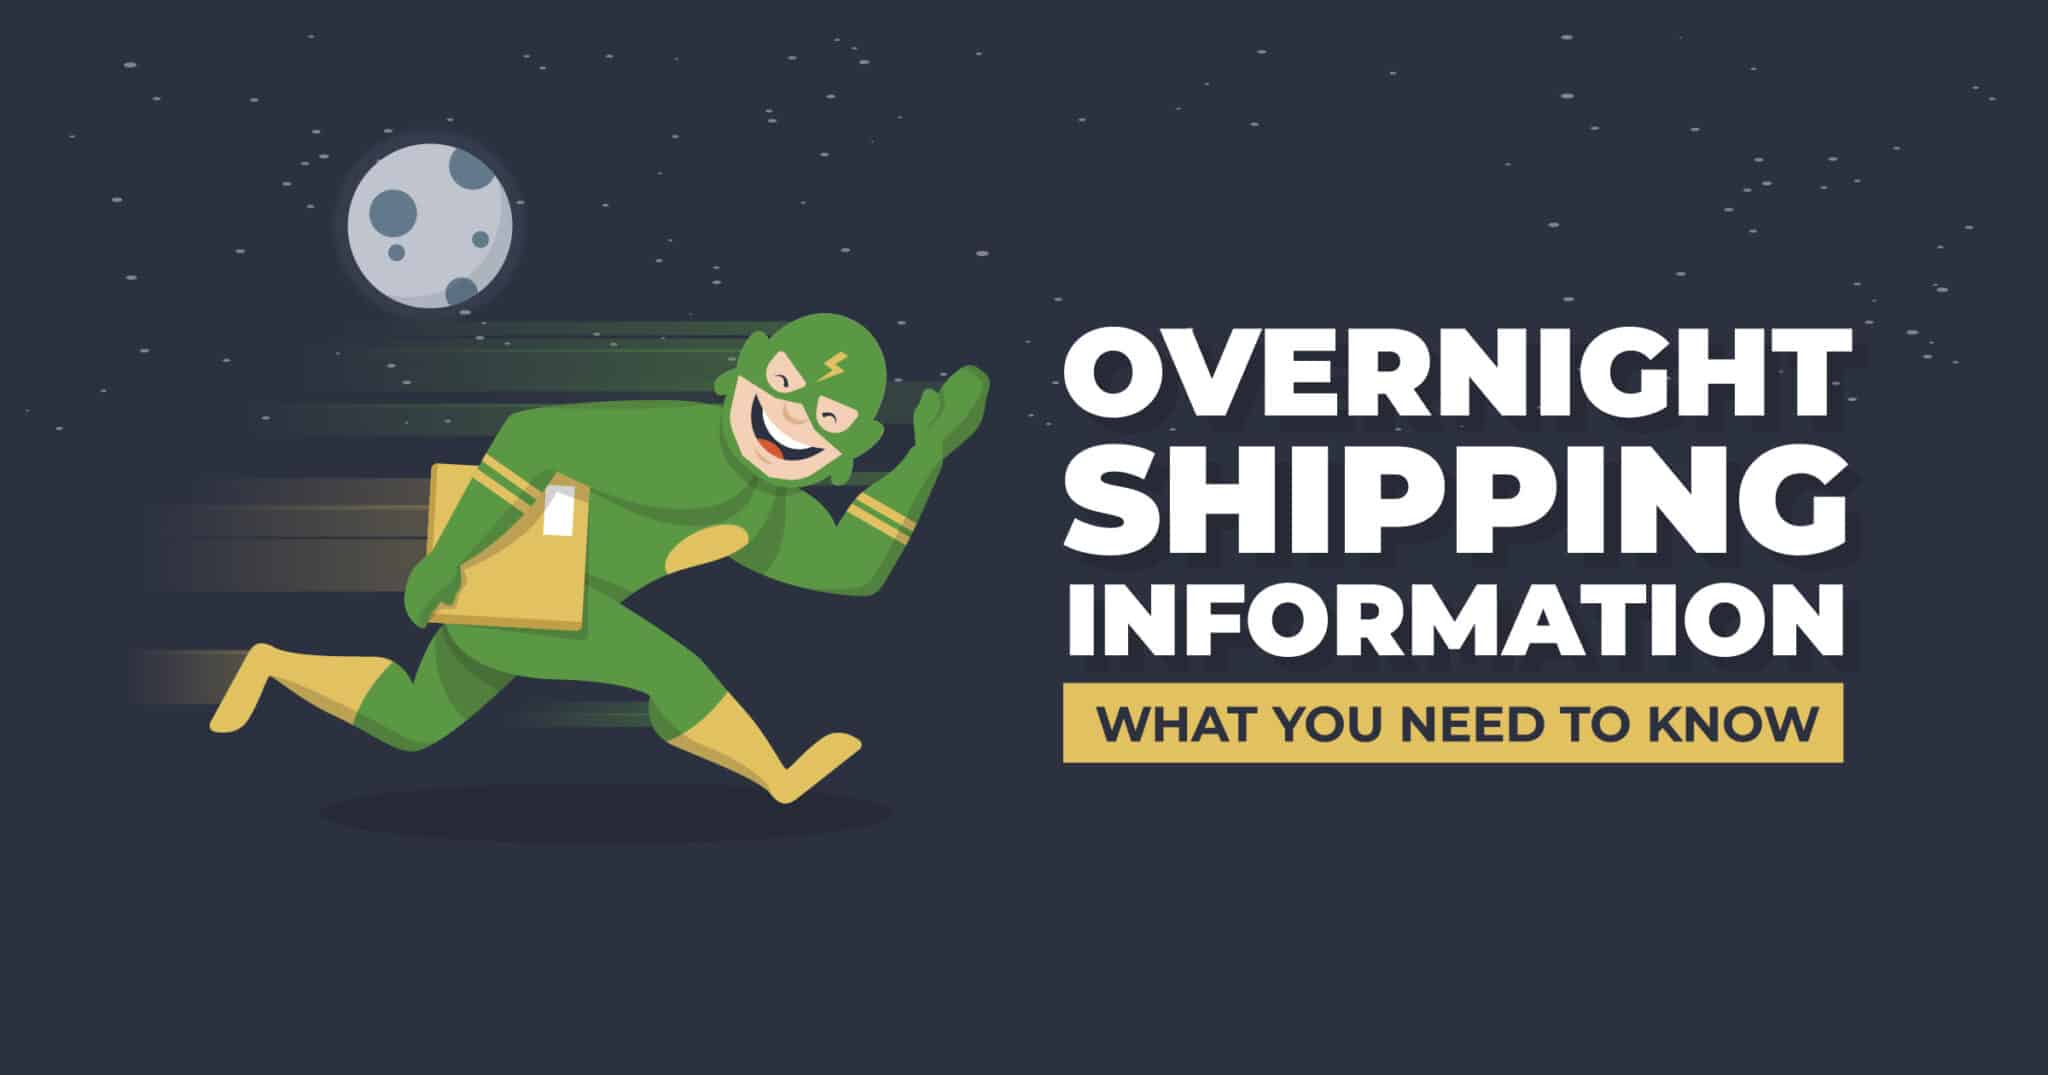 Overnight Shipping Information - What You Need to Know